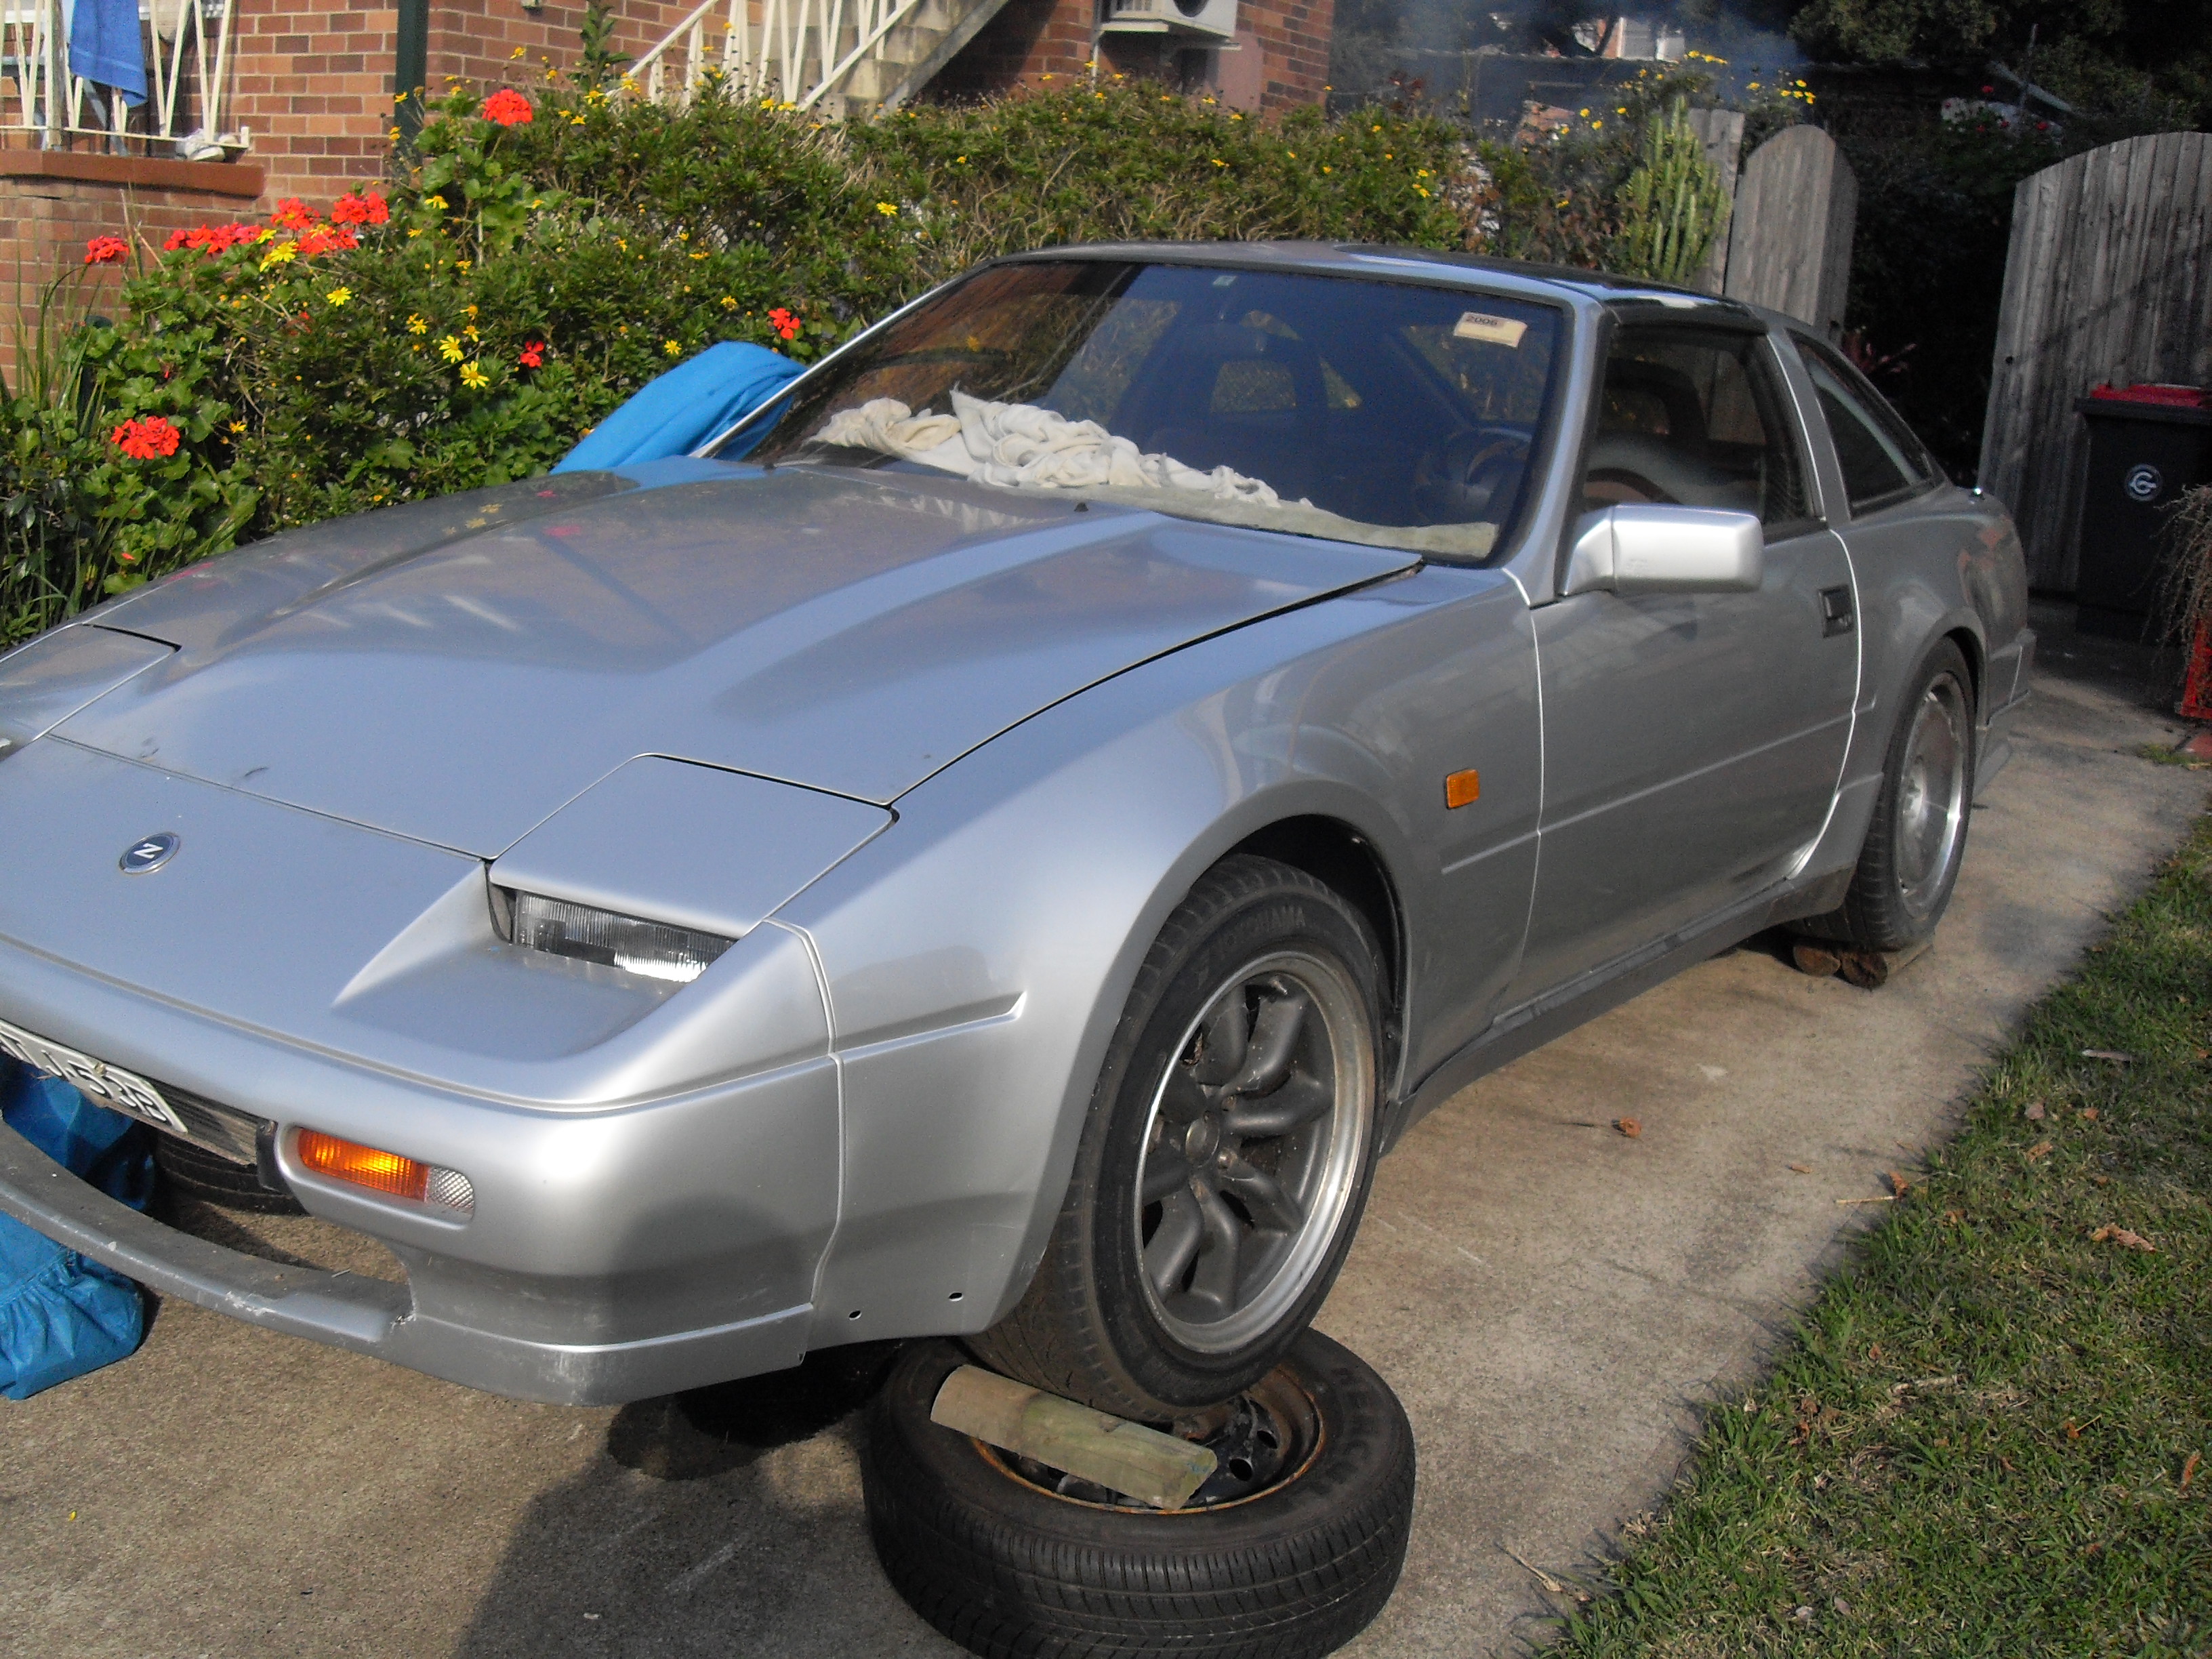 Z31 300zr Rb26 Auto Twin Top Mount 500kw For Sale Private Whole Cars Only Sau Community